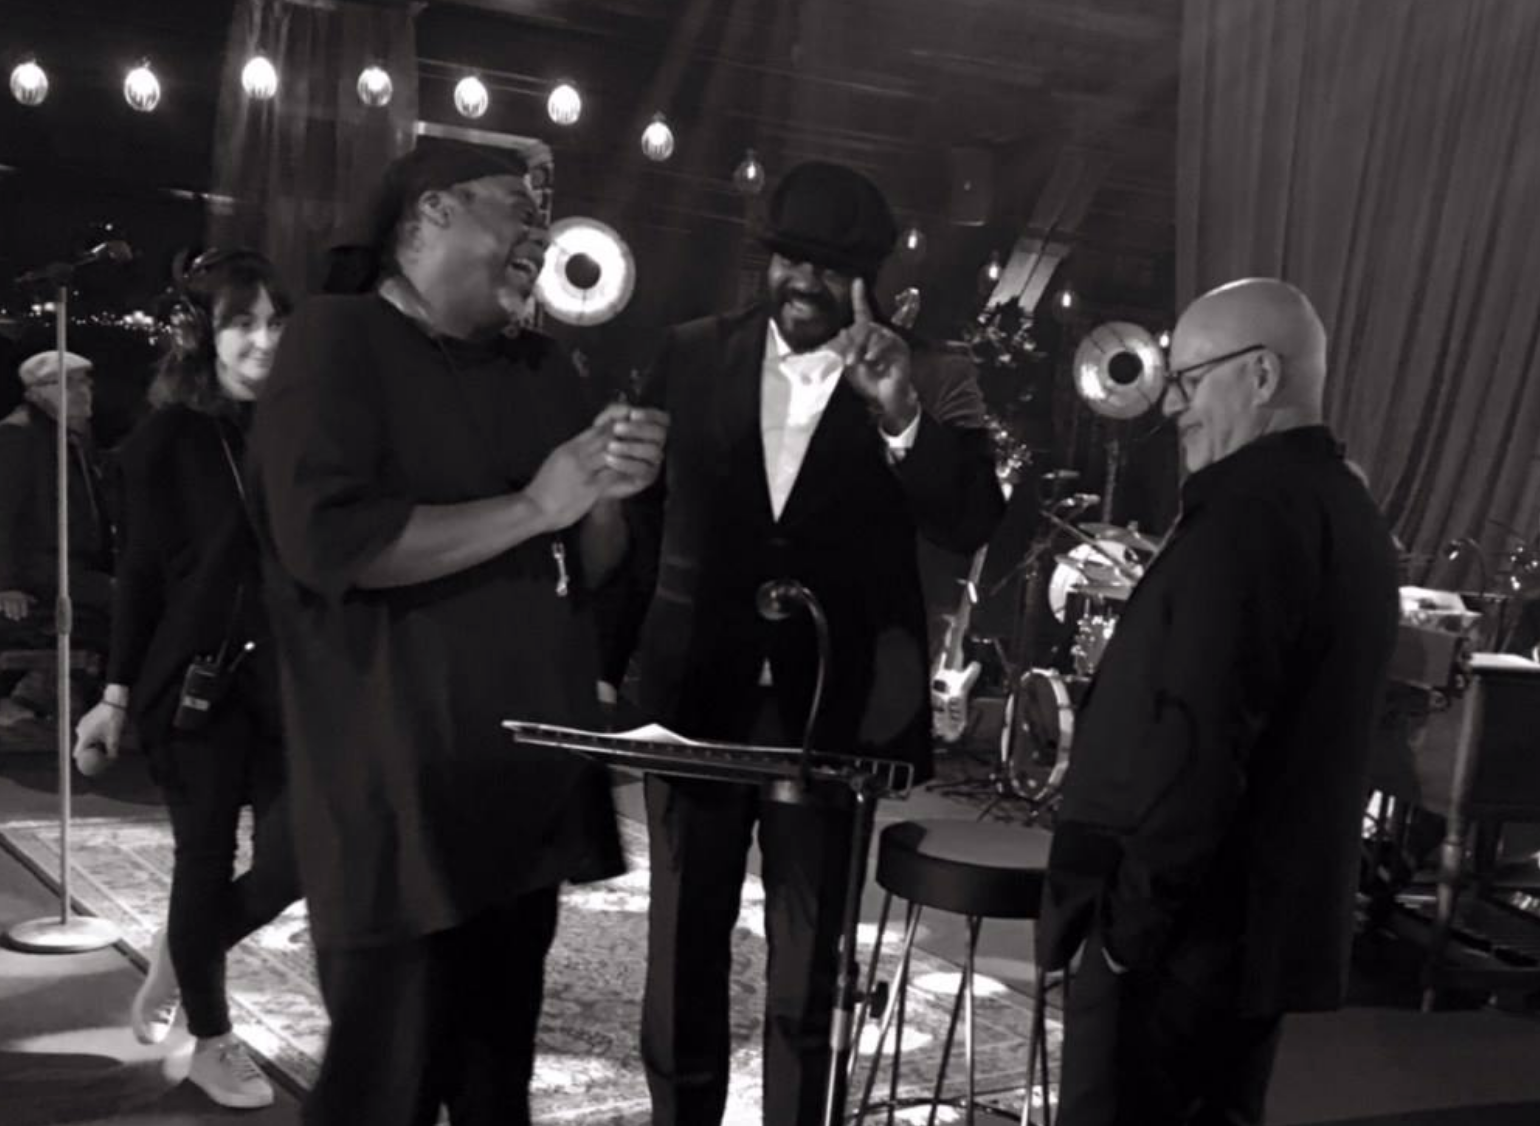 Merry Christmas Baby – With Gregory Porter & Friends